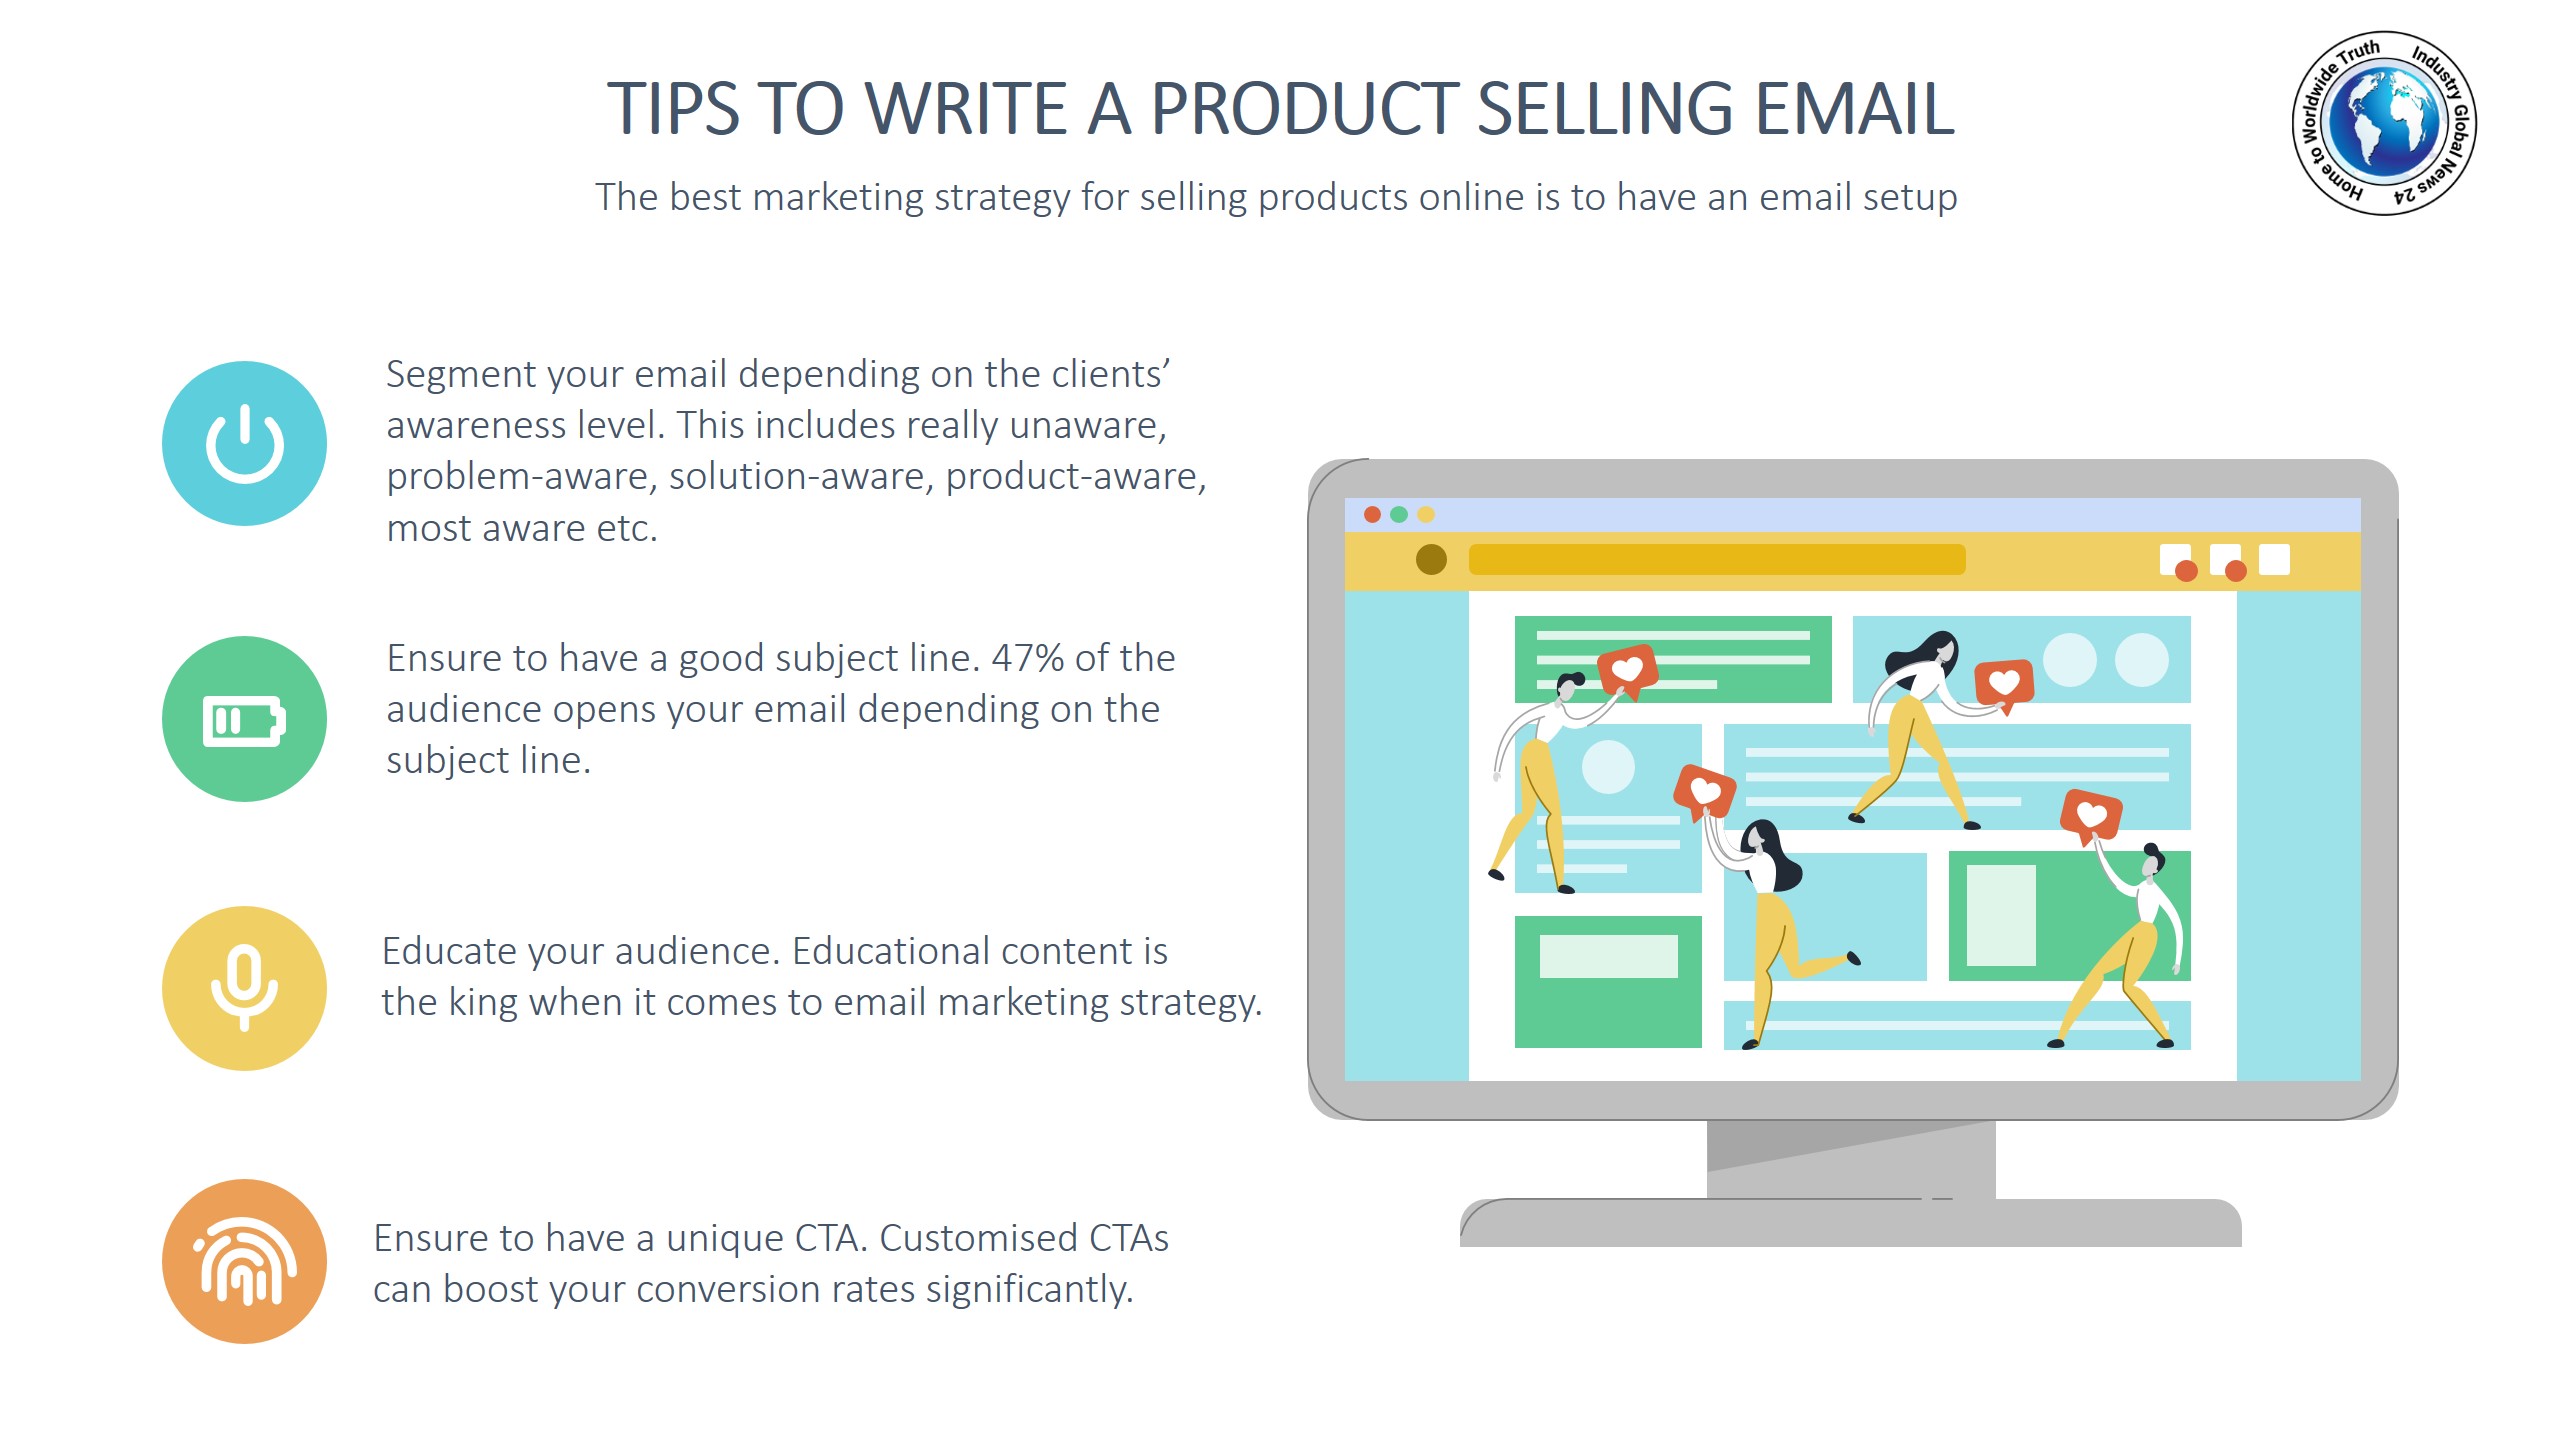 Tips to write a product selling email